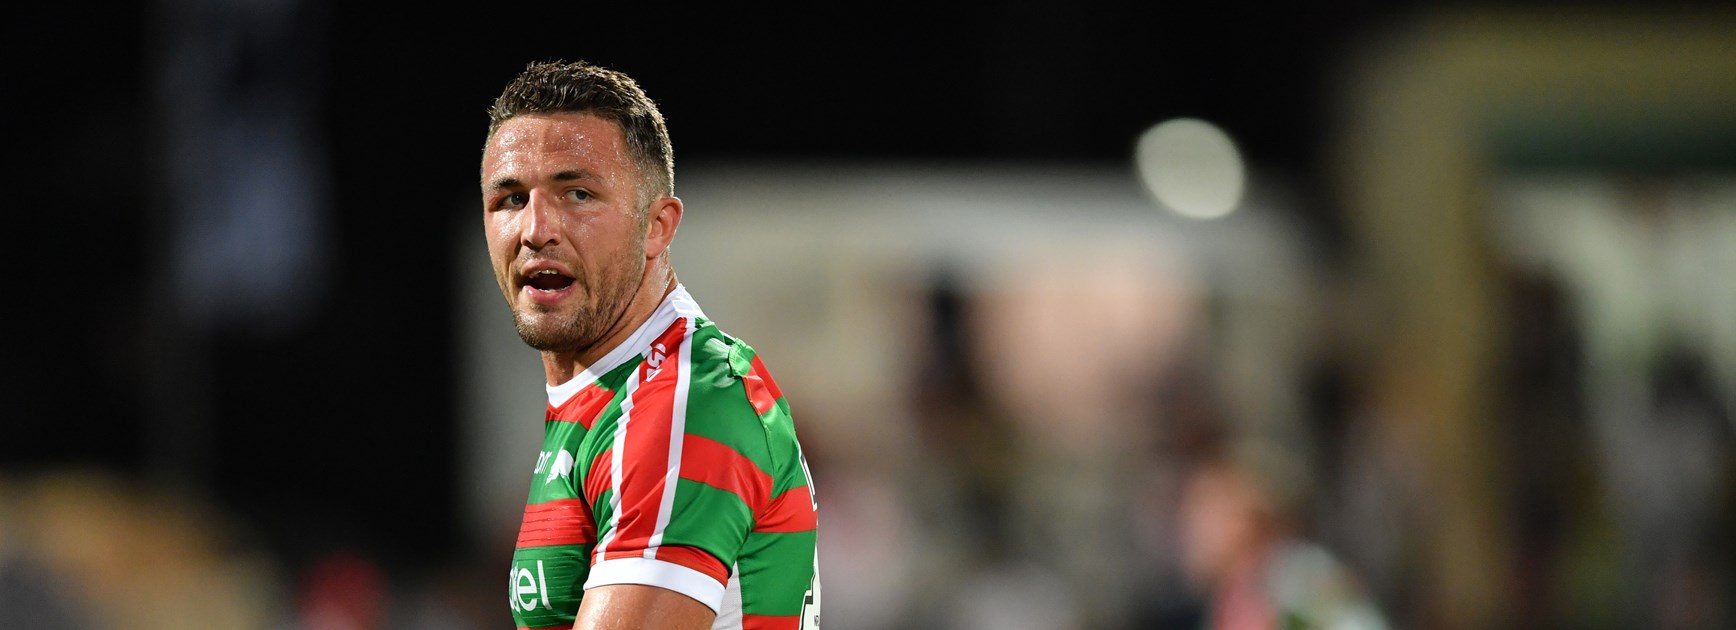 Apologetic Burgess receives suspended fine over 'kangaroo court' comments